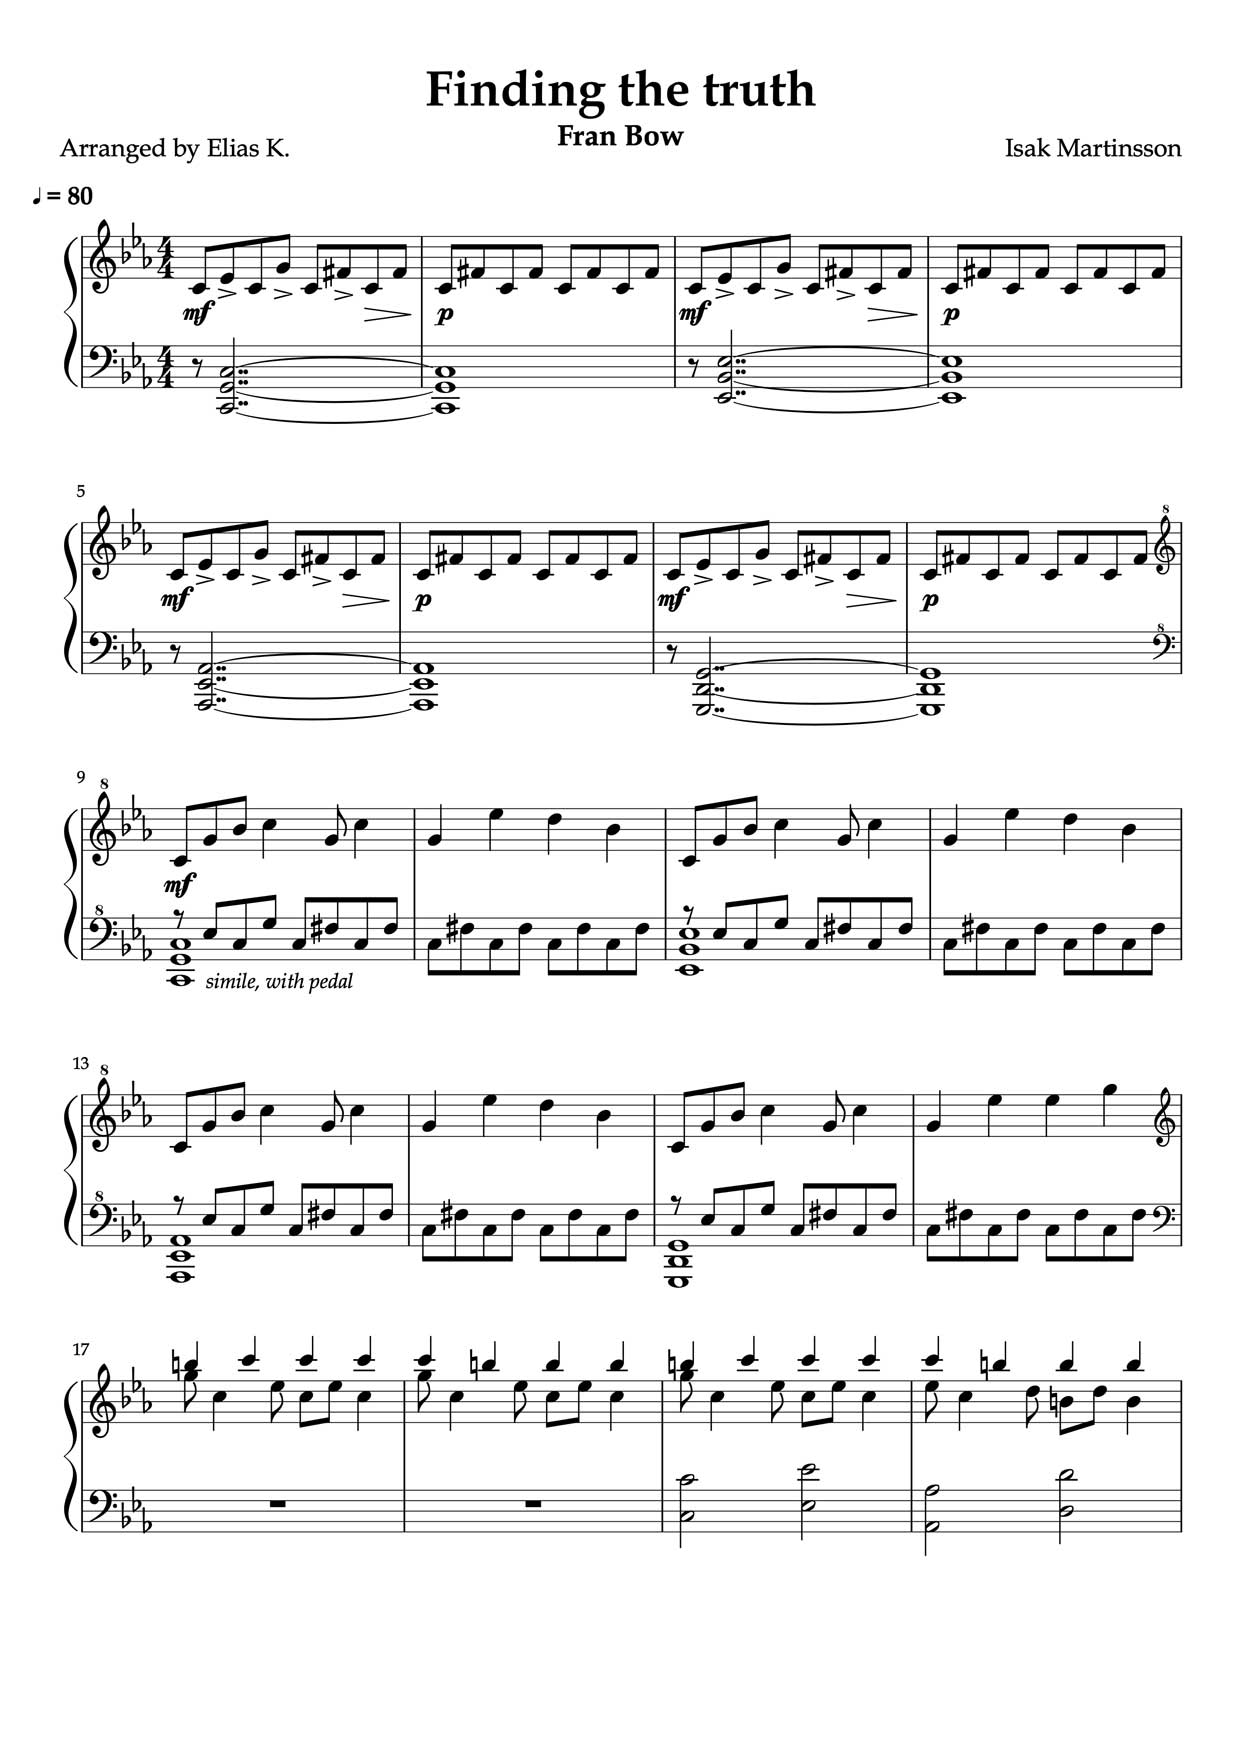 Finding the truth – Fran Bow sheet music | Sheethost